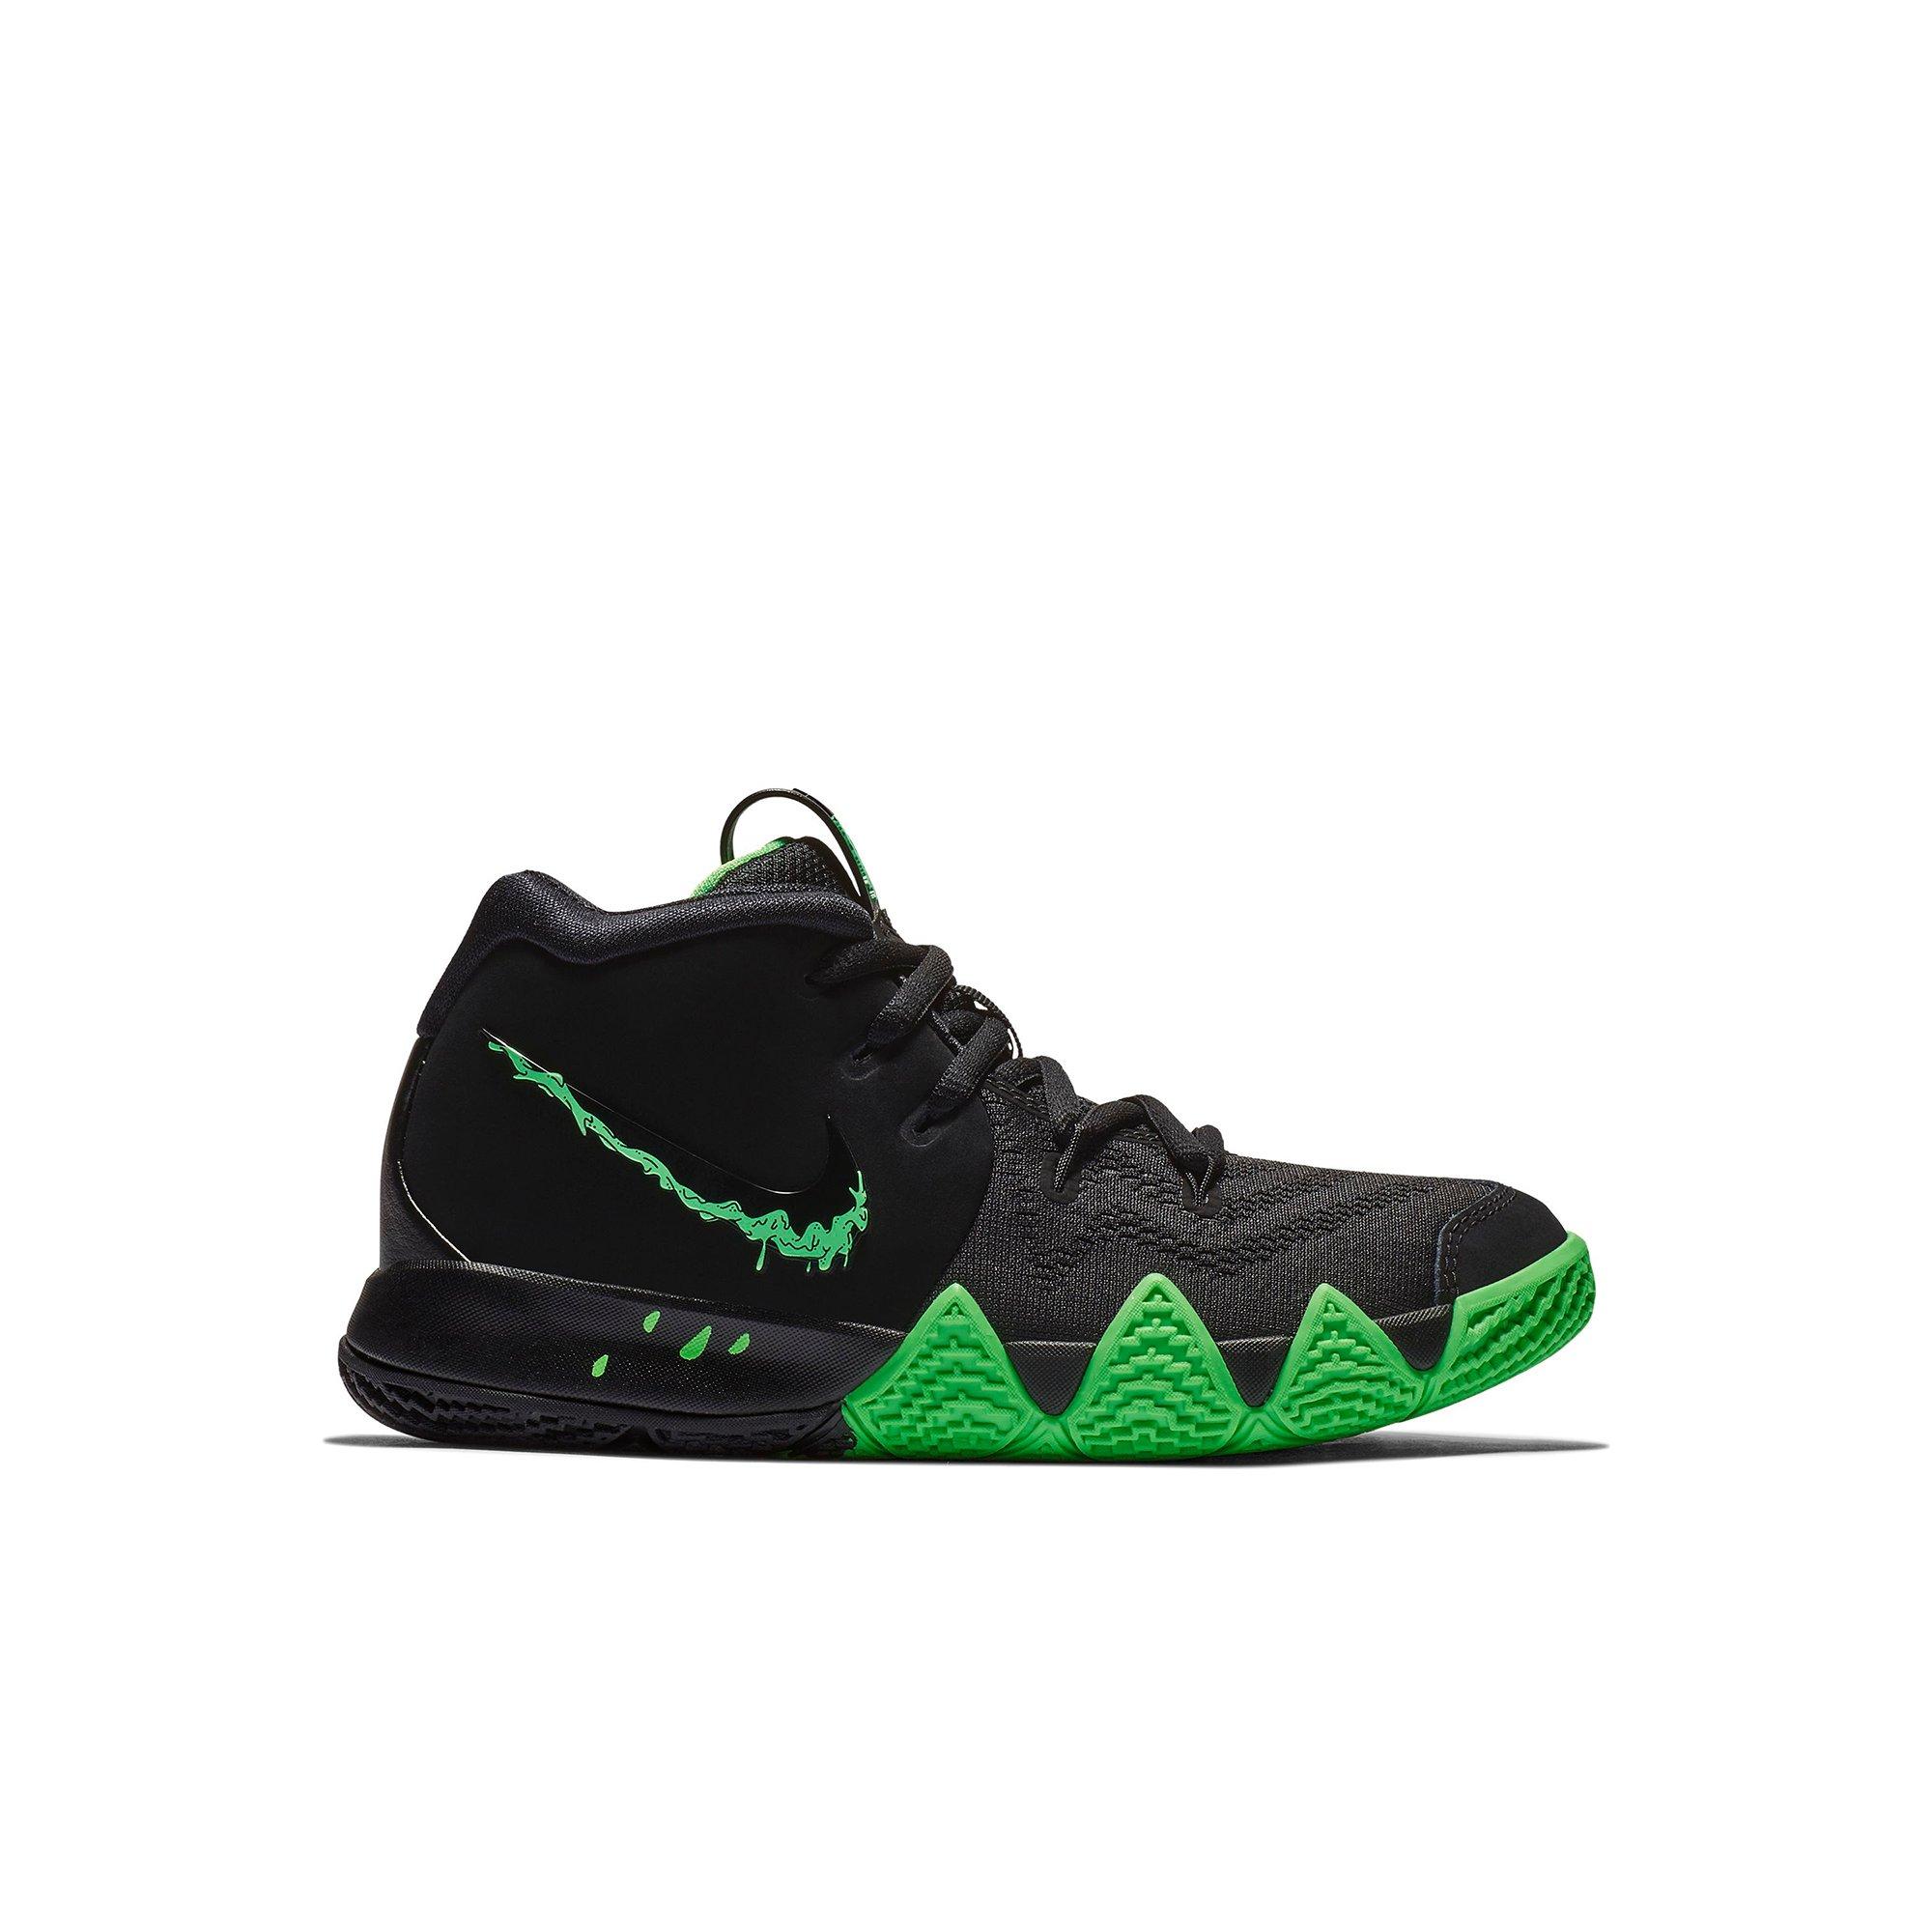 kyrie shoes green and black